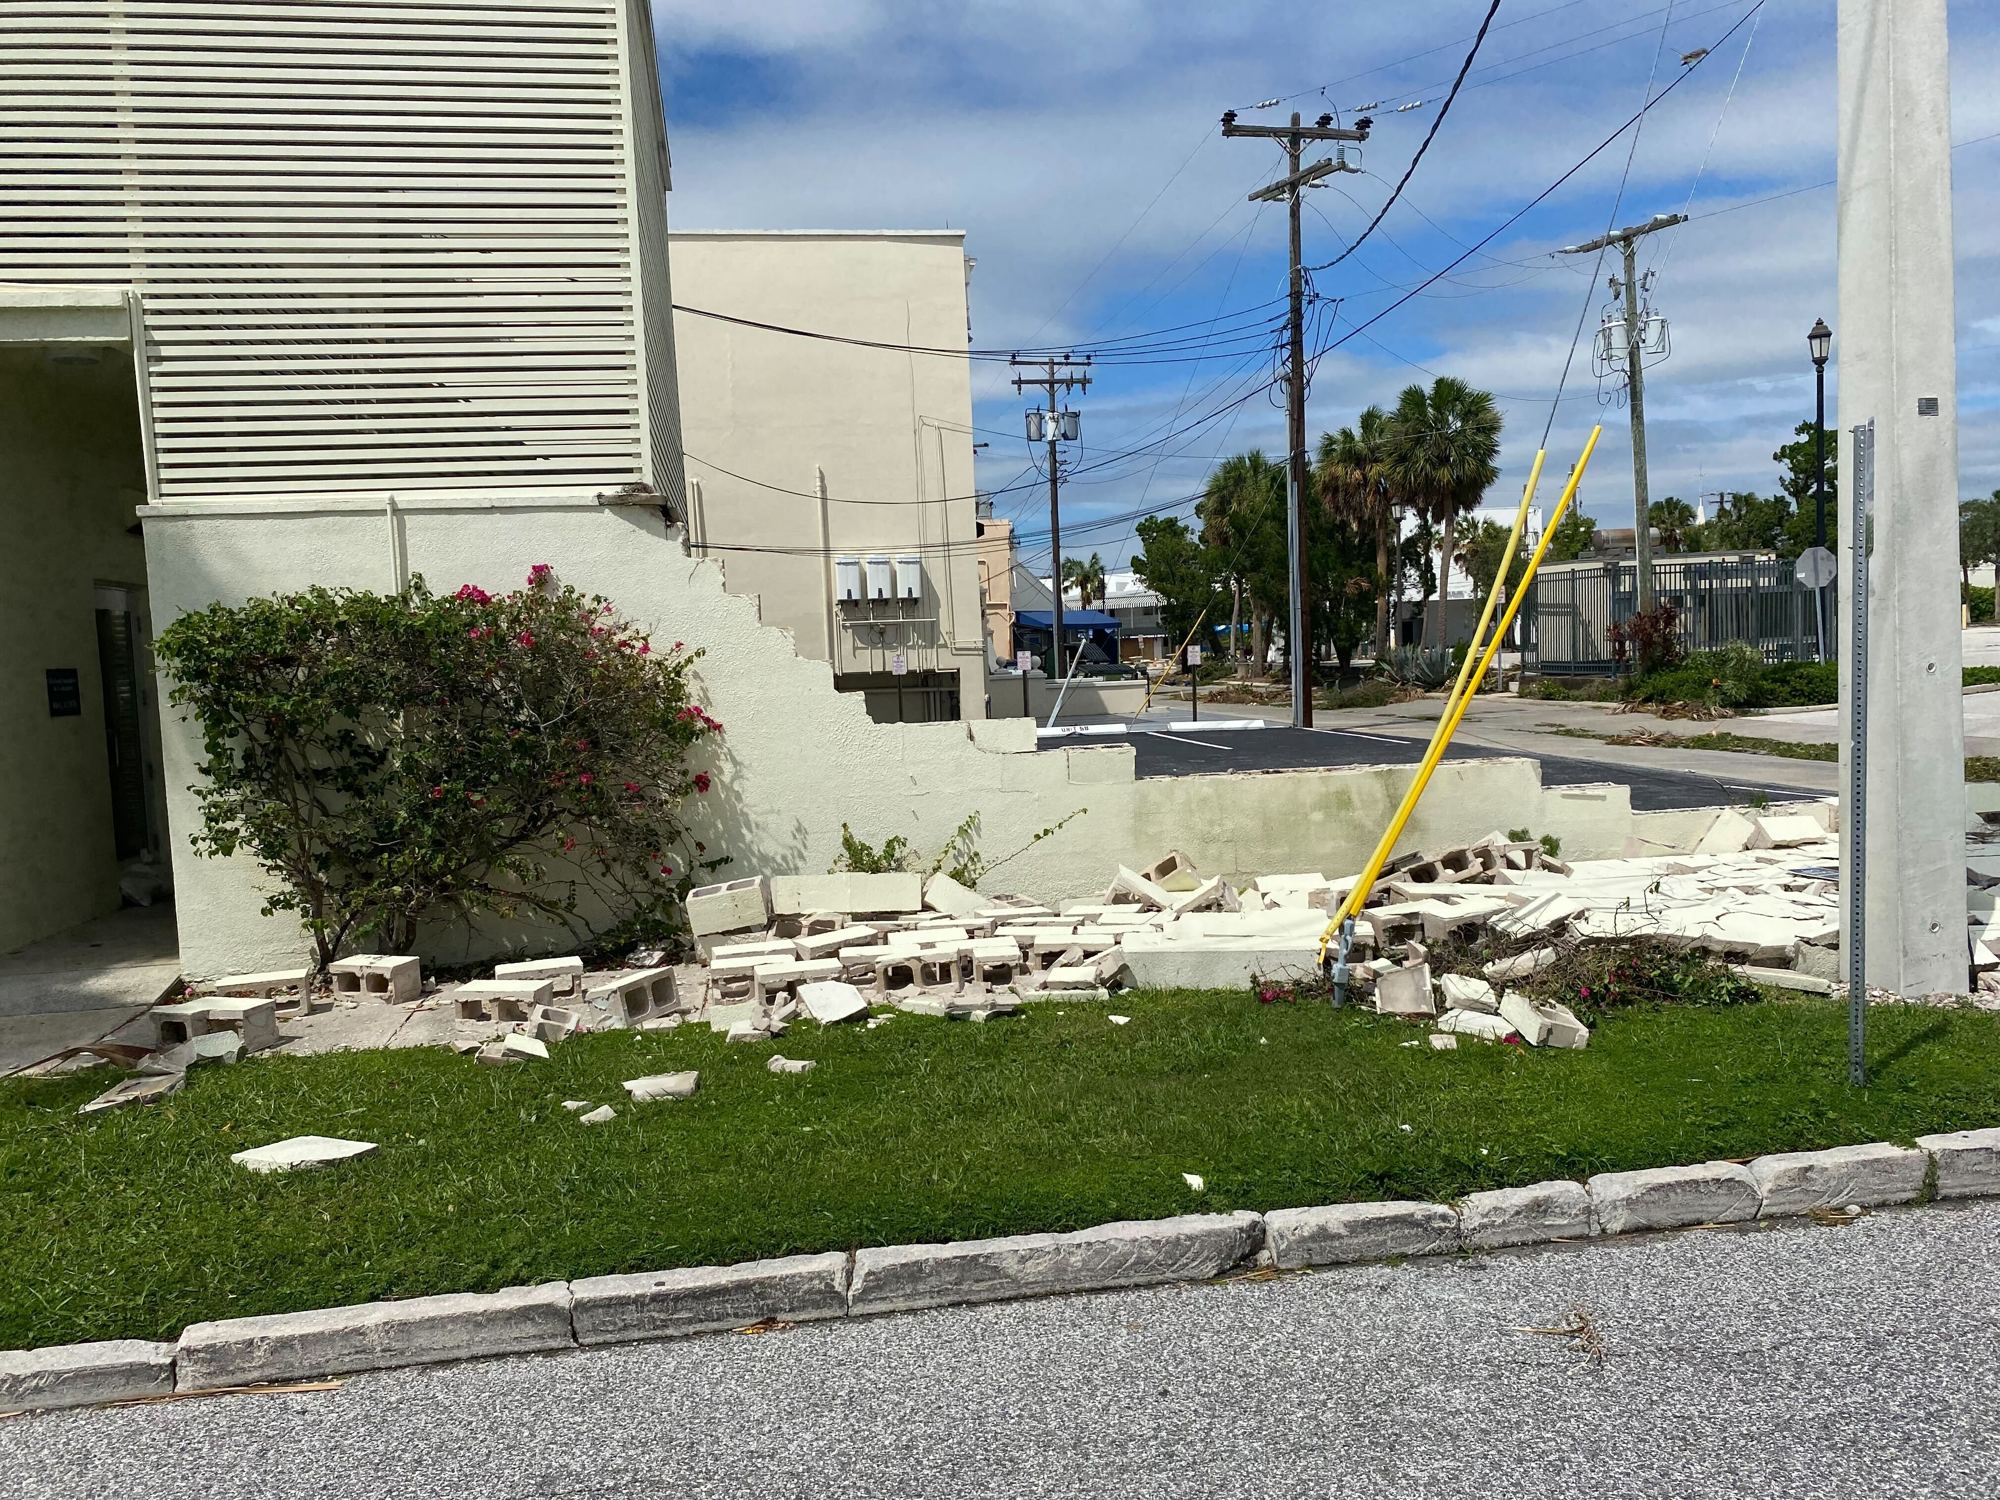 One business in the Circle experienced damage to an external wall. (Photo by Spencer Fordin)